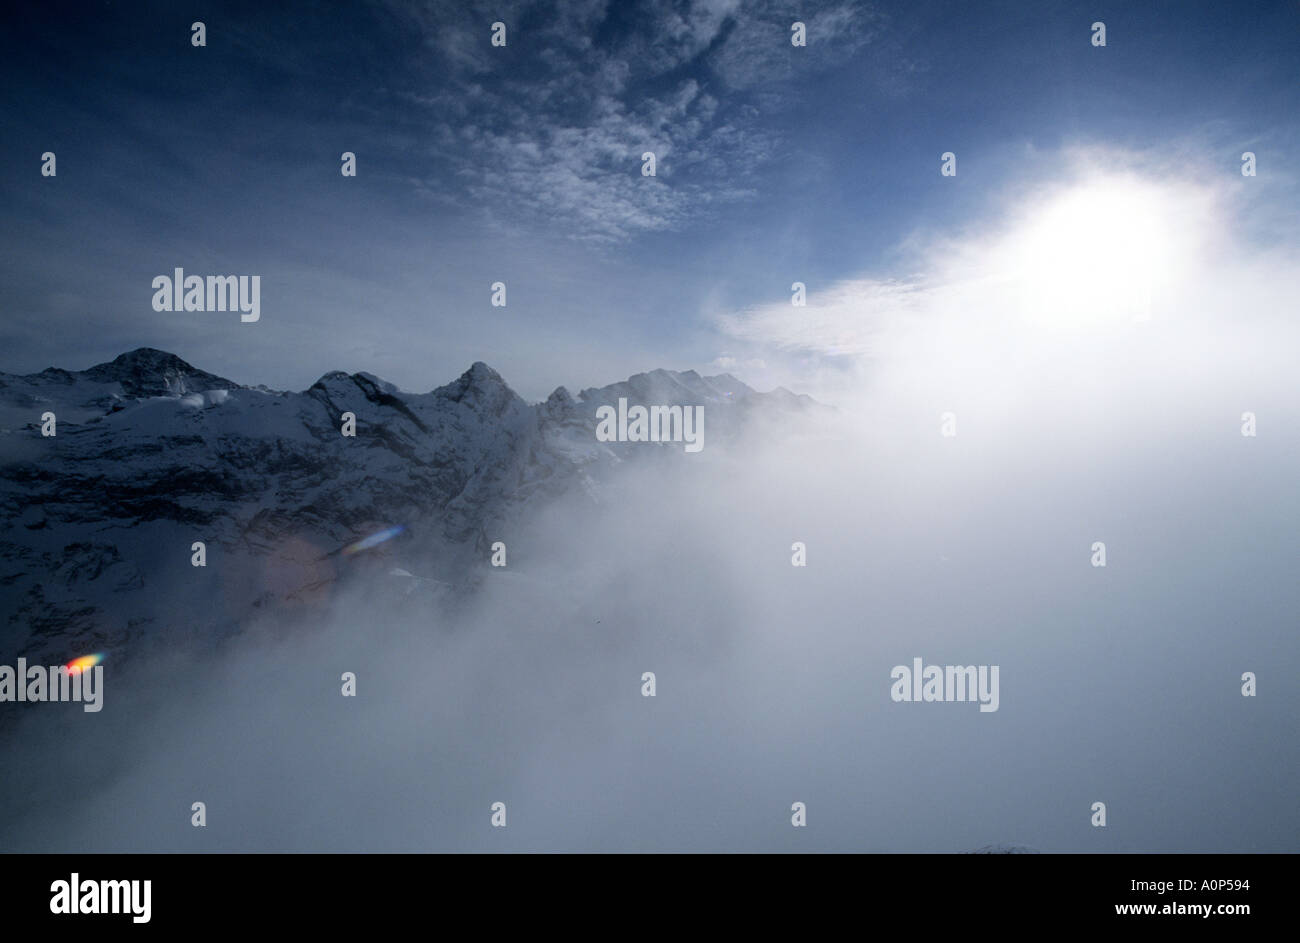 Swiss Alps, Winter. Views from Piz Gloria top of the Shilthorn Mountain in  the Bernese Oberland, Switzerland. Location for James Bond Film On Her Maje  Stock Photo - Alamy